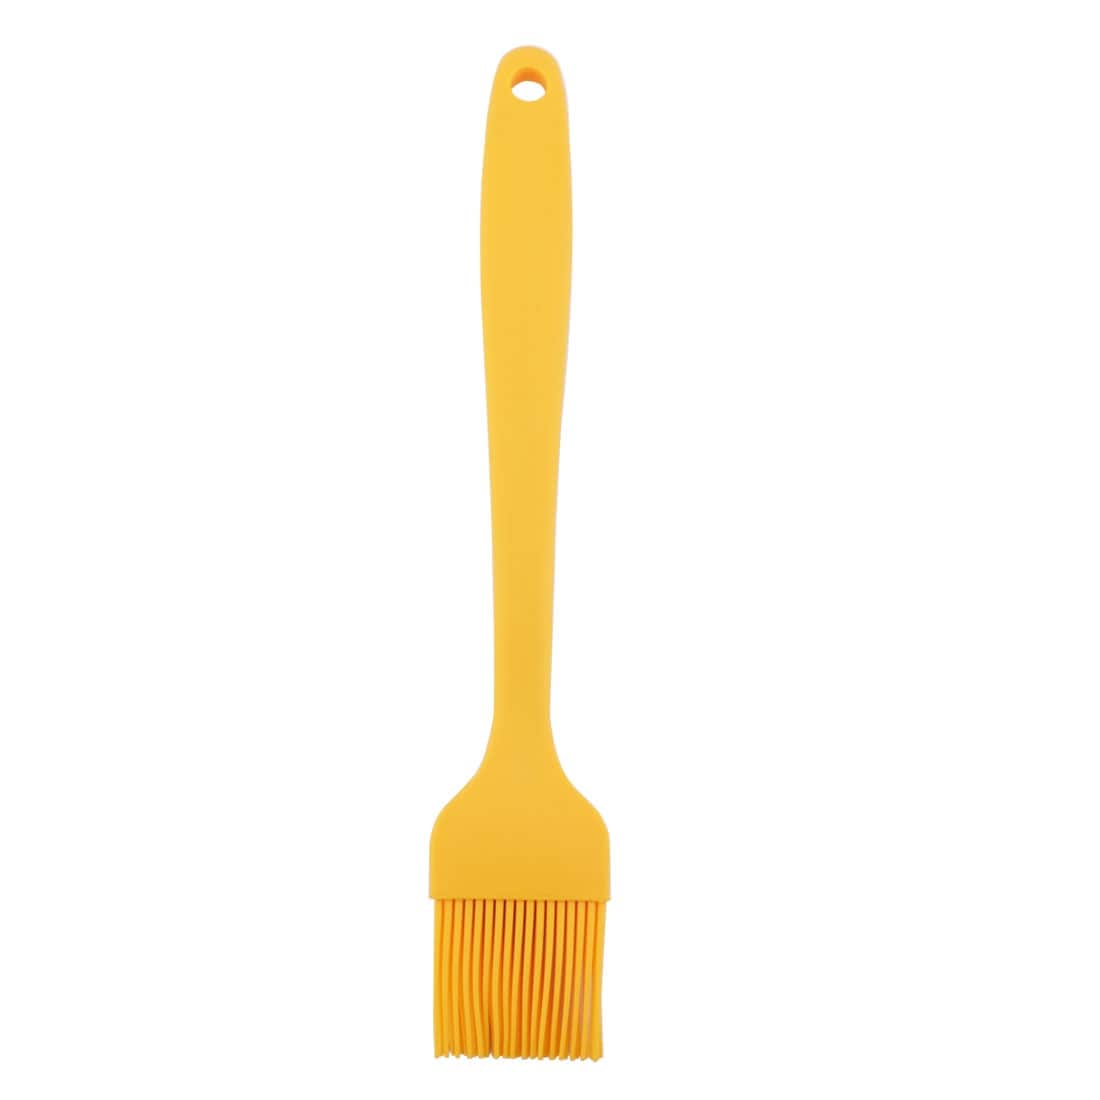 https://ak1.ostkcdn.com/images/products/is/images/direct/f2b0058dee15b7321336c9f6bcdac313ea2c077c/Silicone-Brush-Pastry-Oil-Basting-Heat-Resistant-Cooking-Essential-Cookware-for-Kitchen-Barbecue-Pastries-Cakes-Desserts-Yellow.jpg